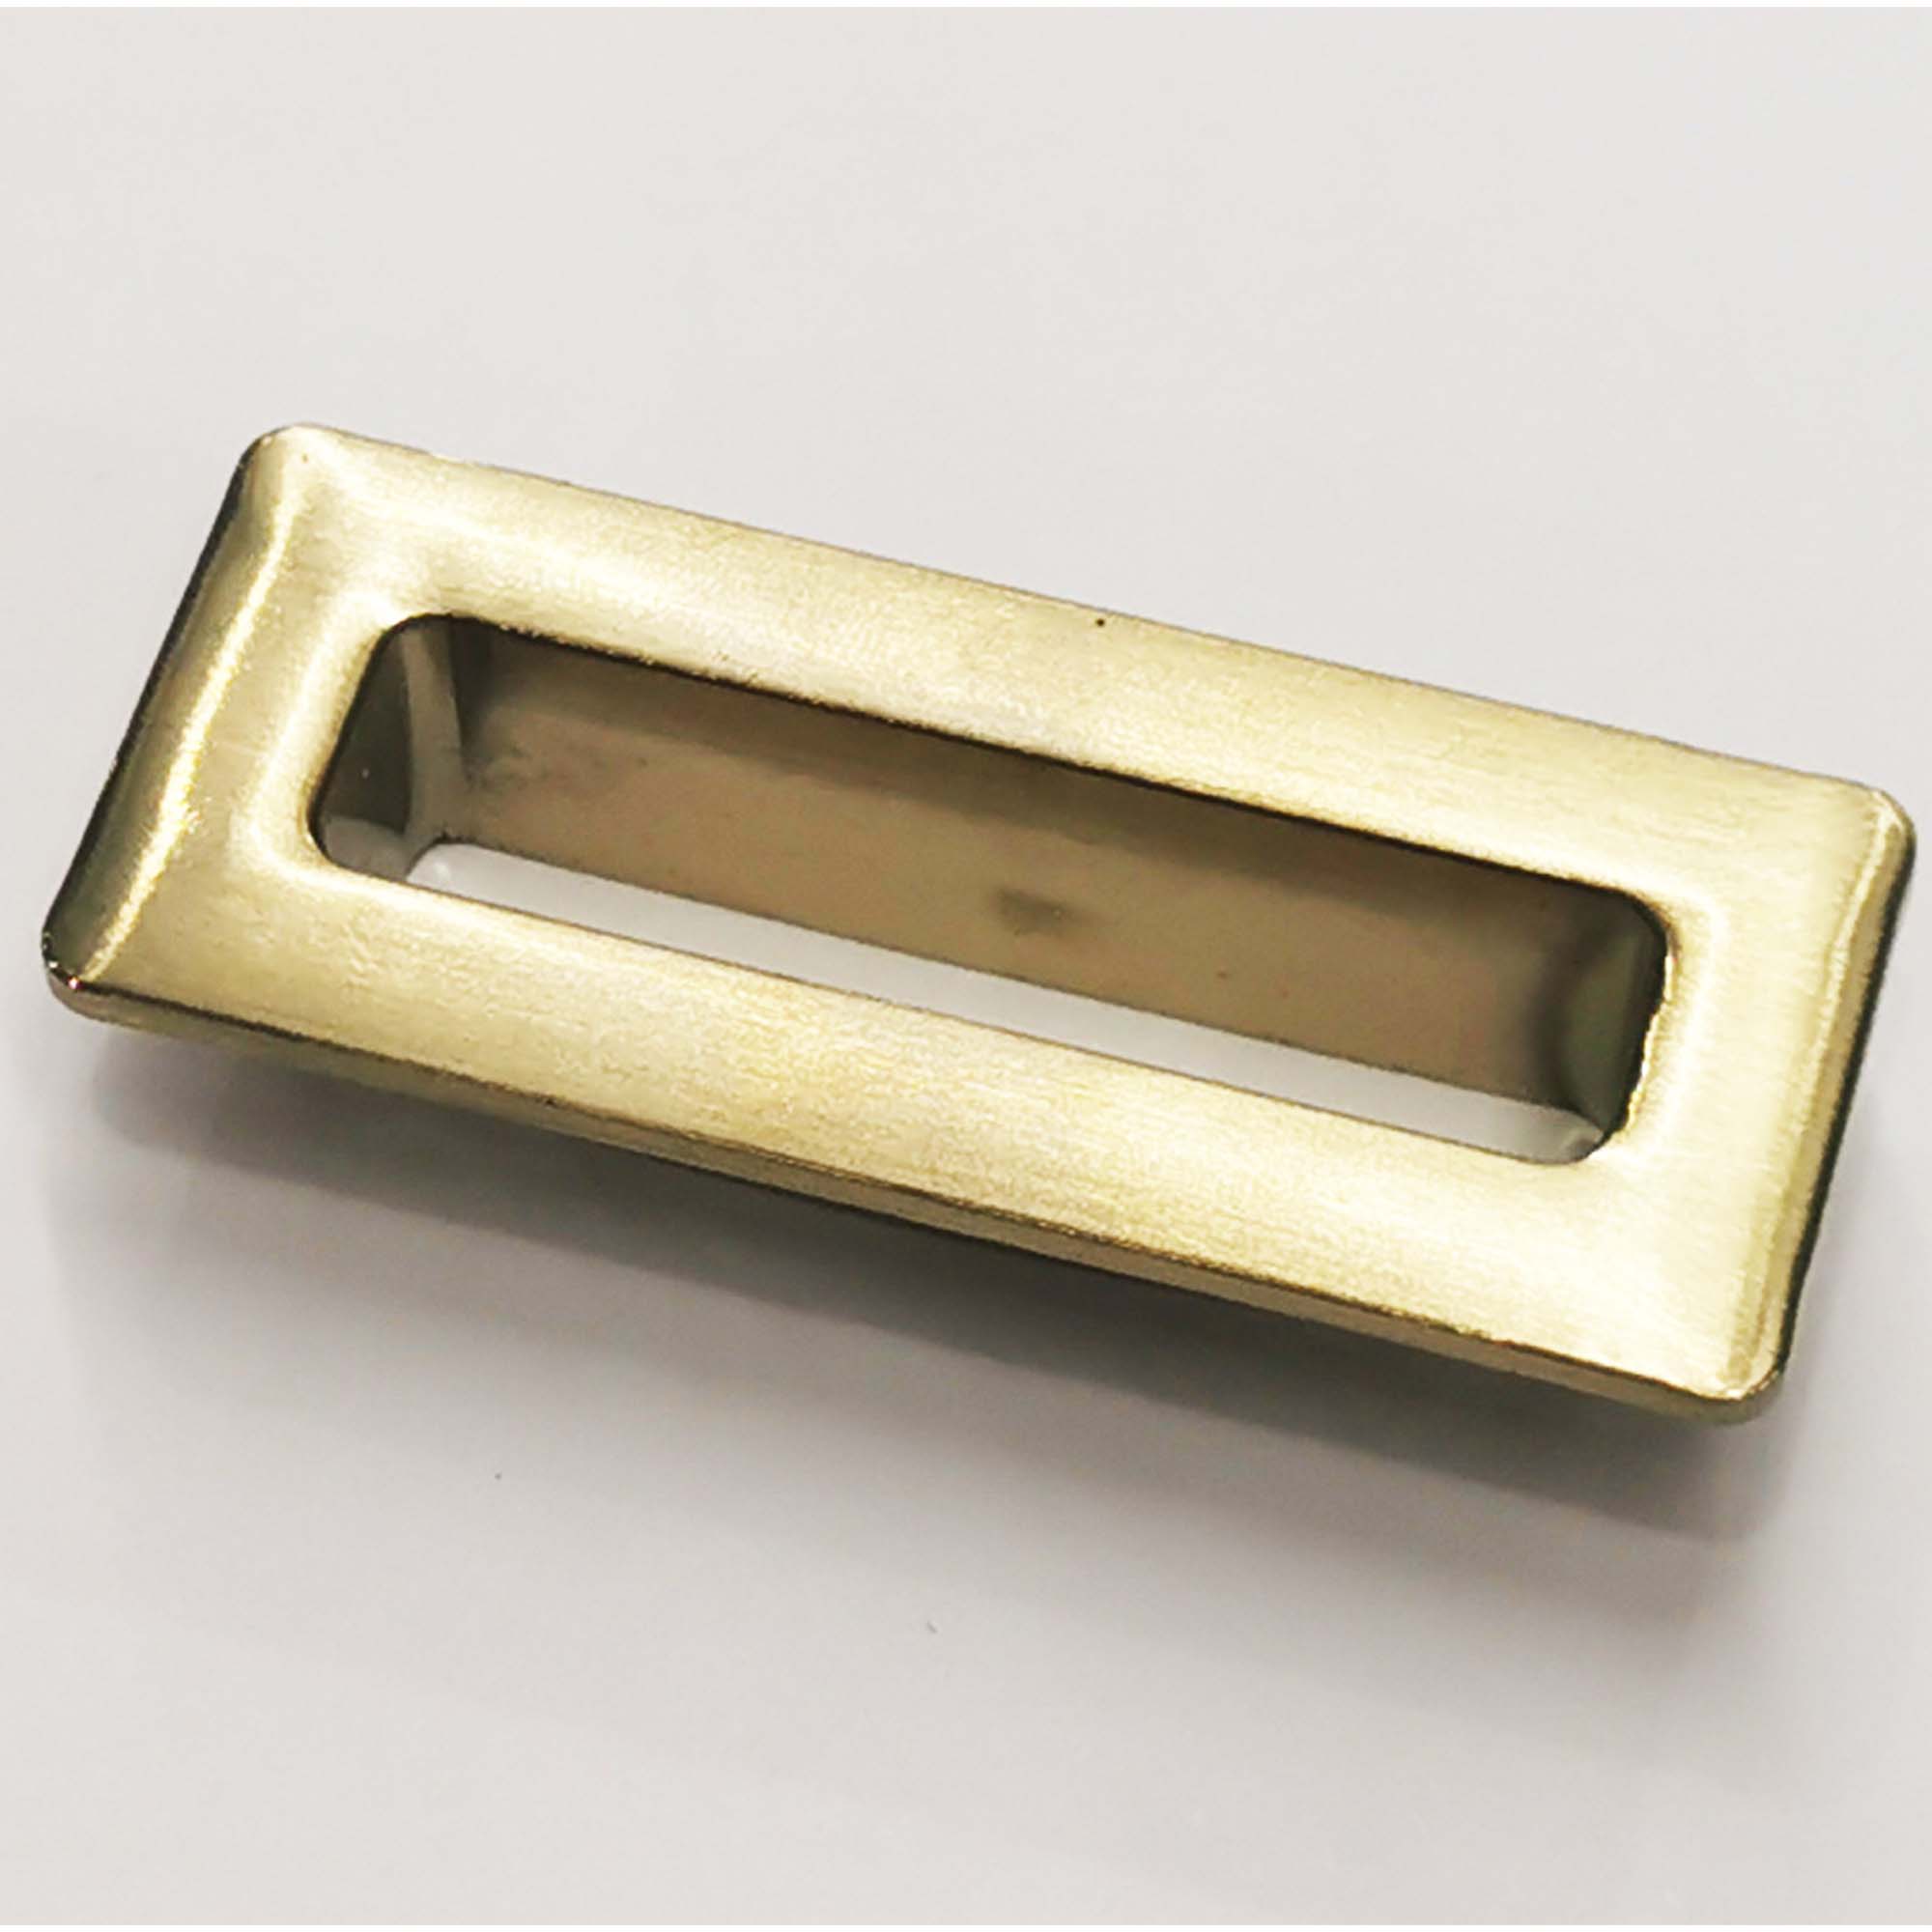 oveflow cover brushed brass